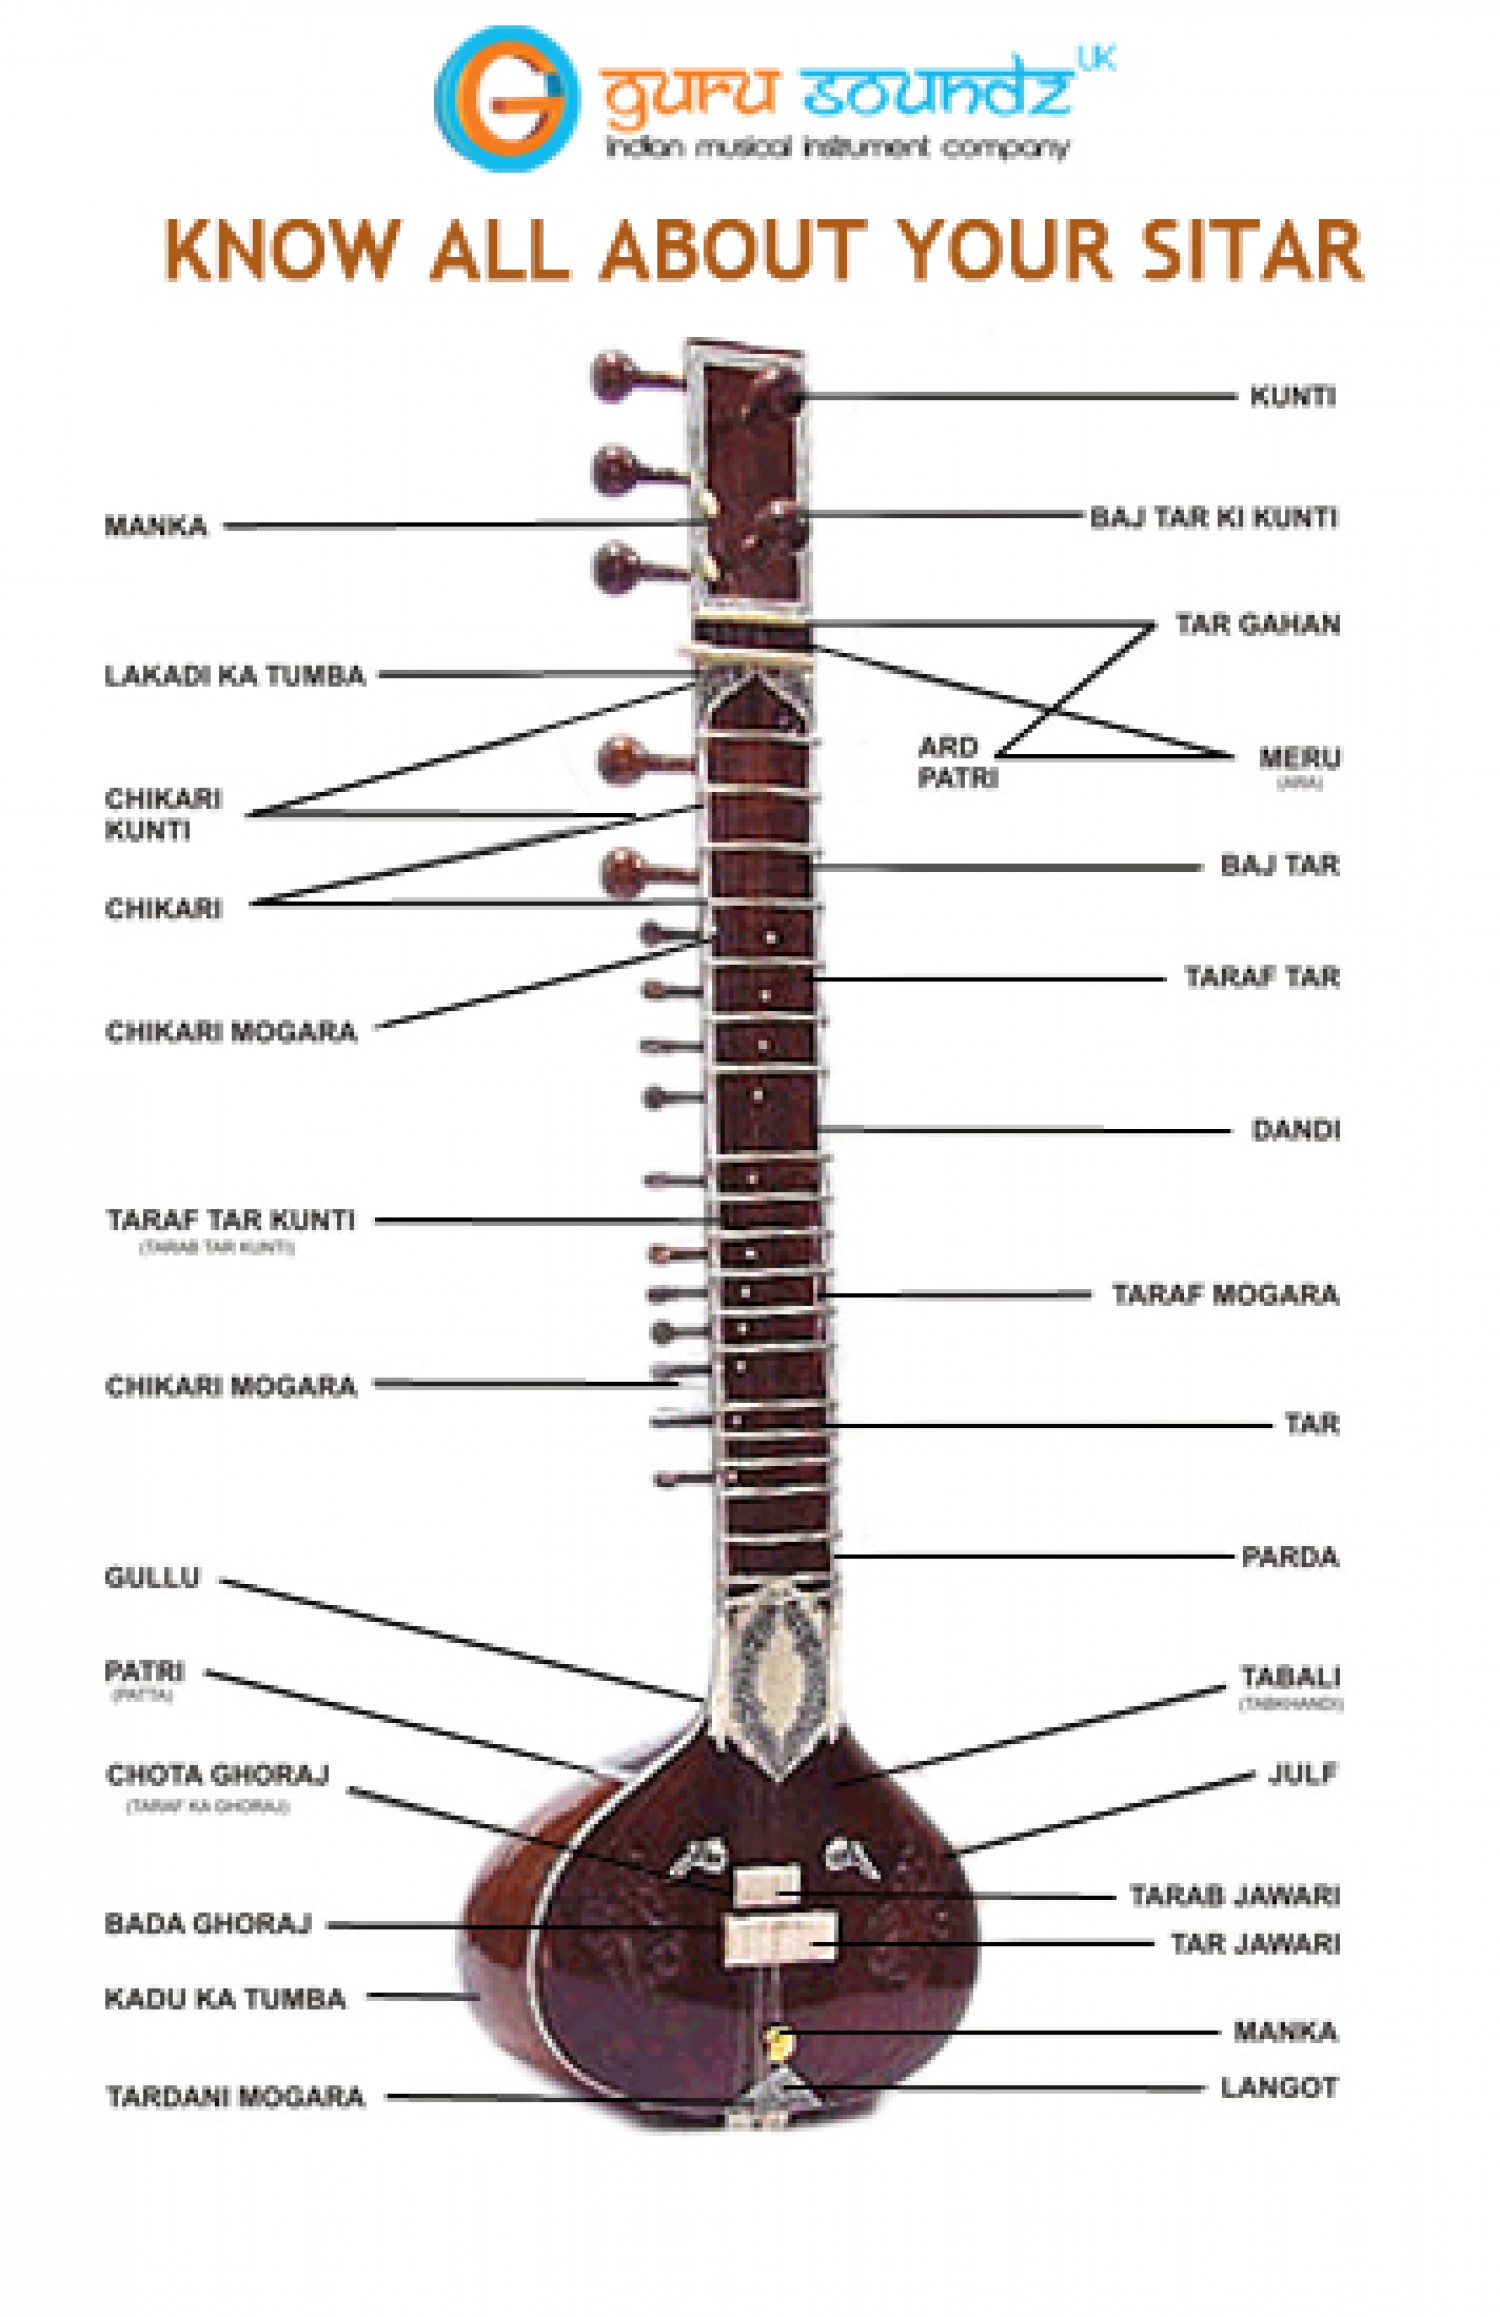 Know All About Your Sitar, The Great Musical Instrument Infographic